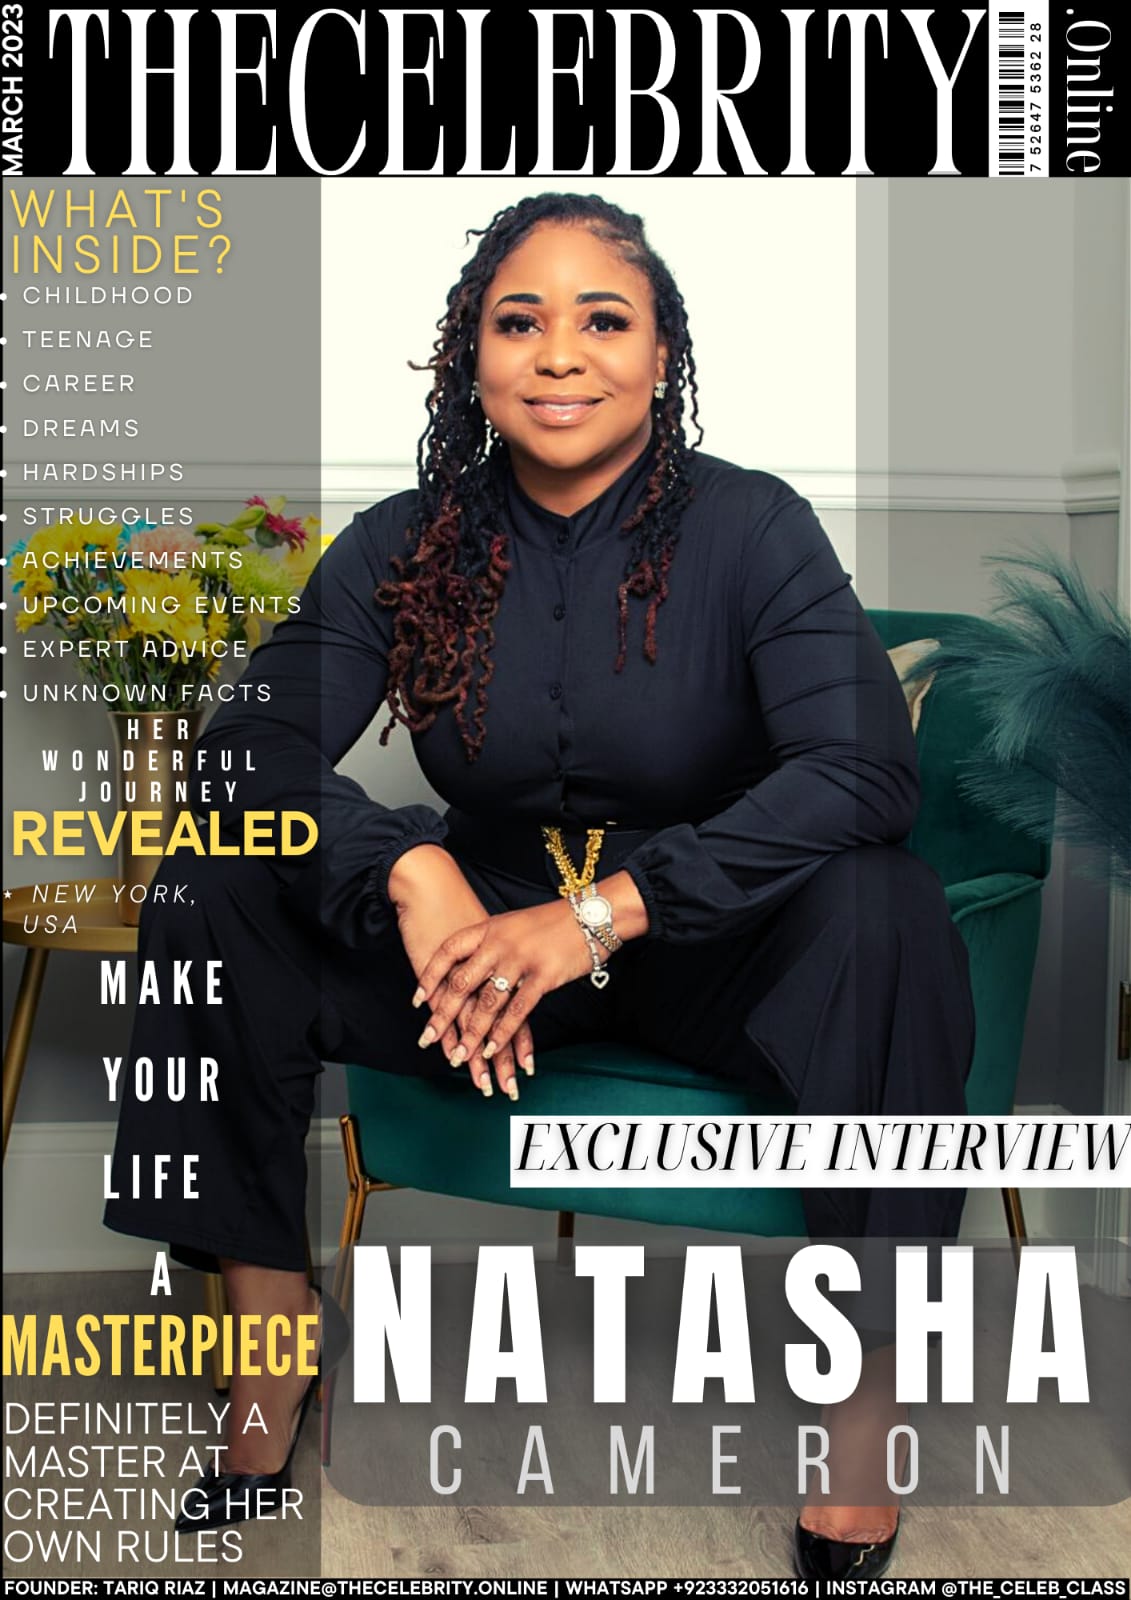 NaTasha Cameron Exclusive Interview – ‘Be intentional about everything you are attached to’